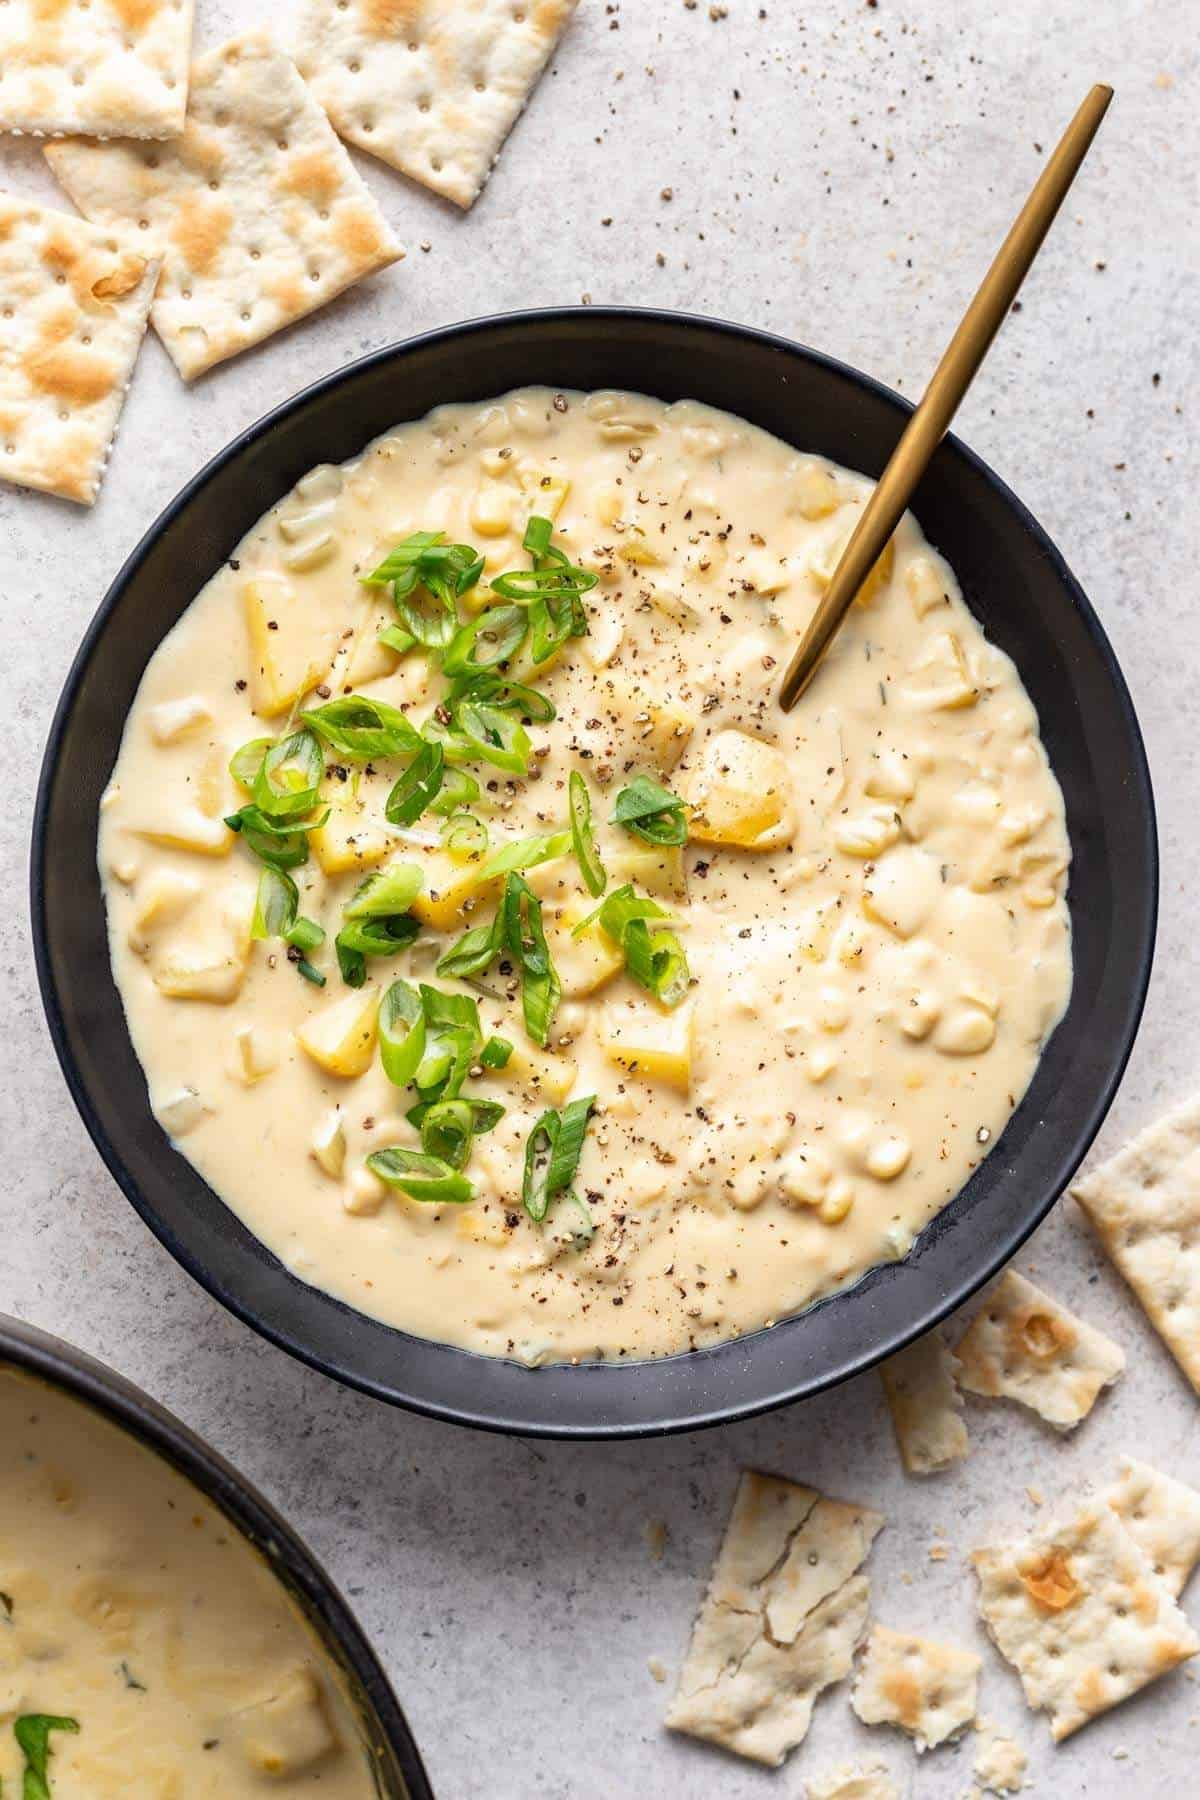 Final vegan corn chowder recipe served in black bowl with crackers.